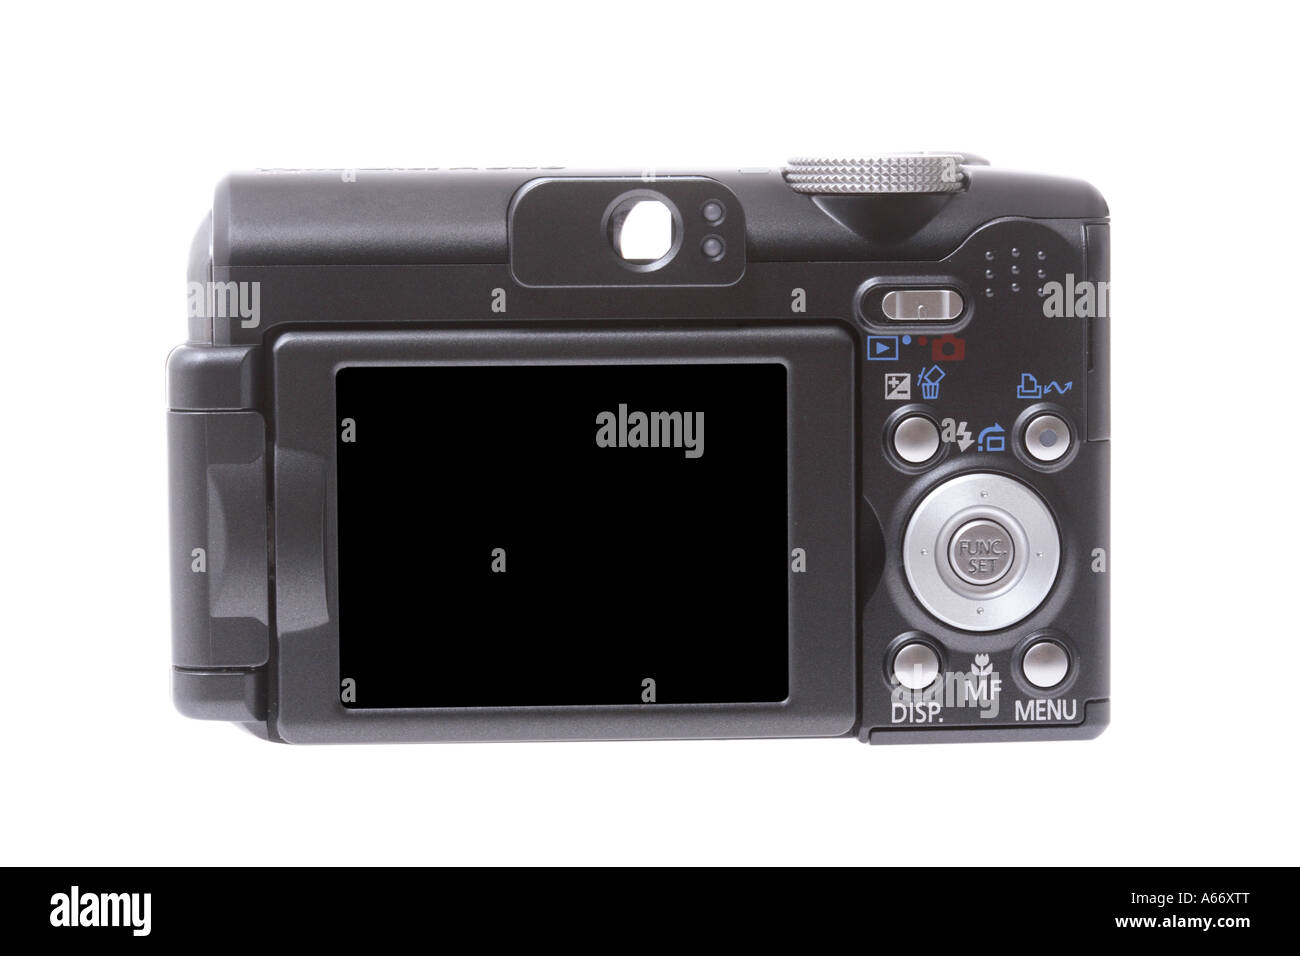 Digital camera cut out on white background Stock Photo